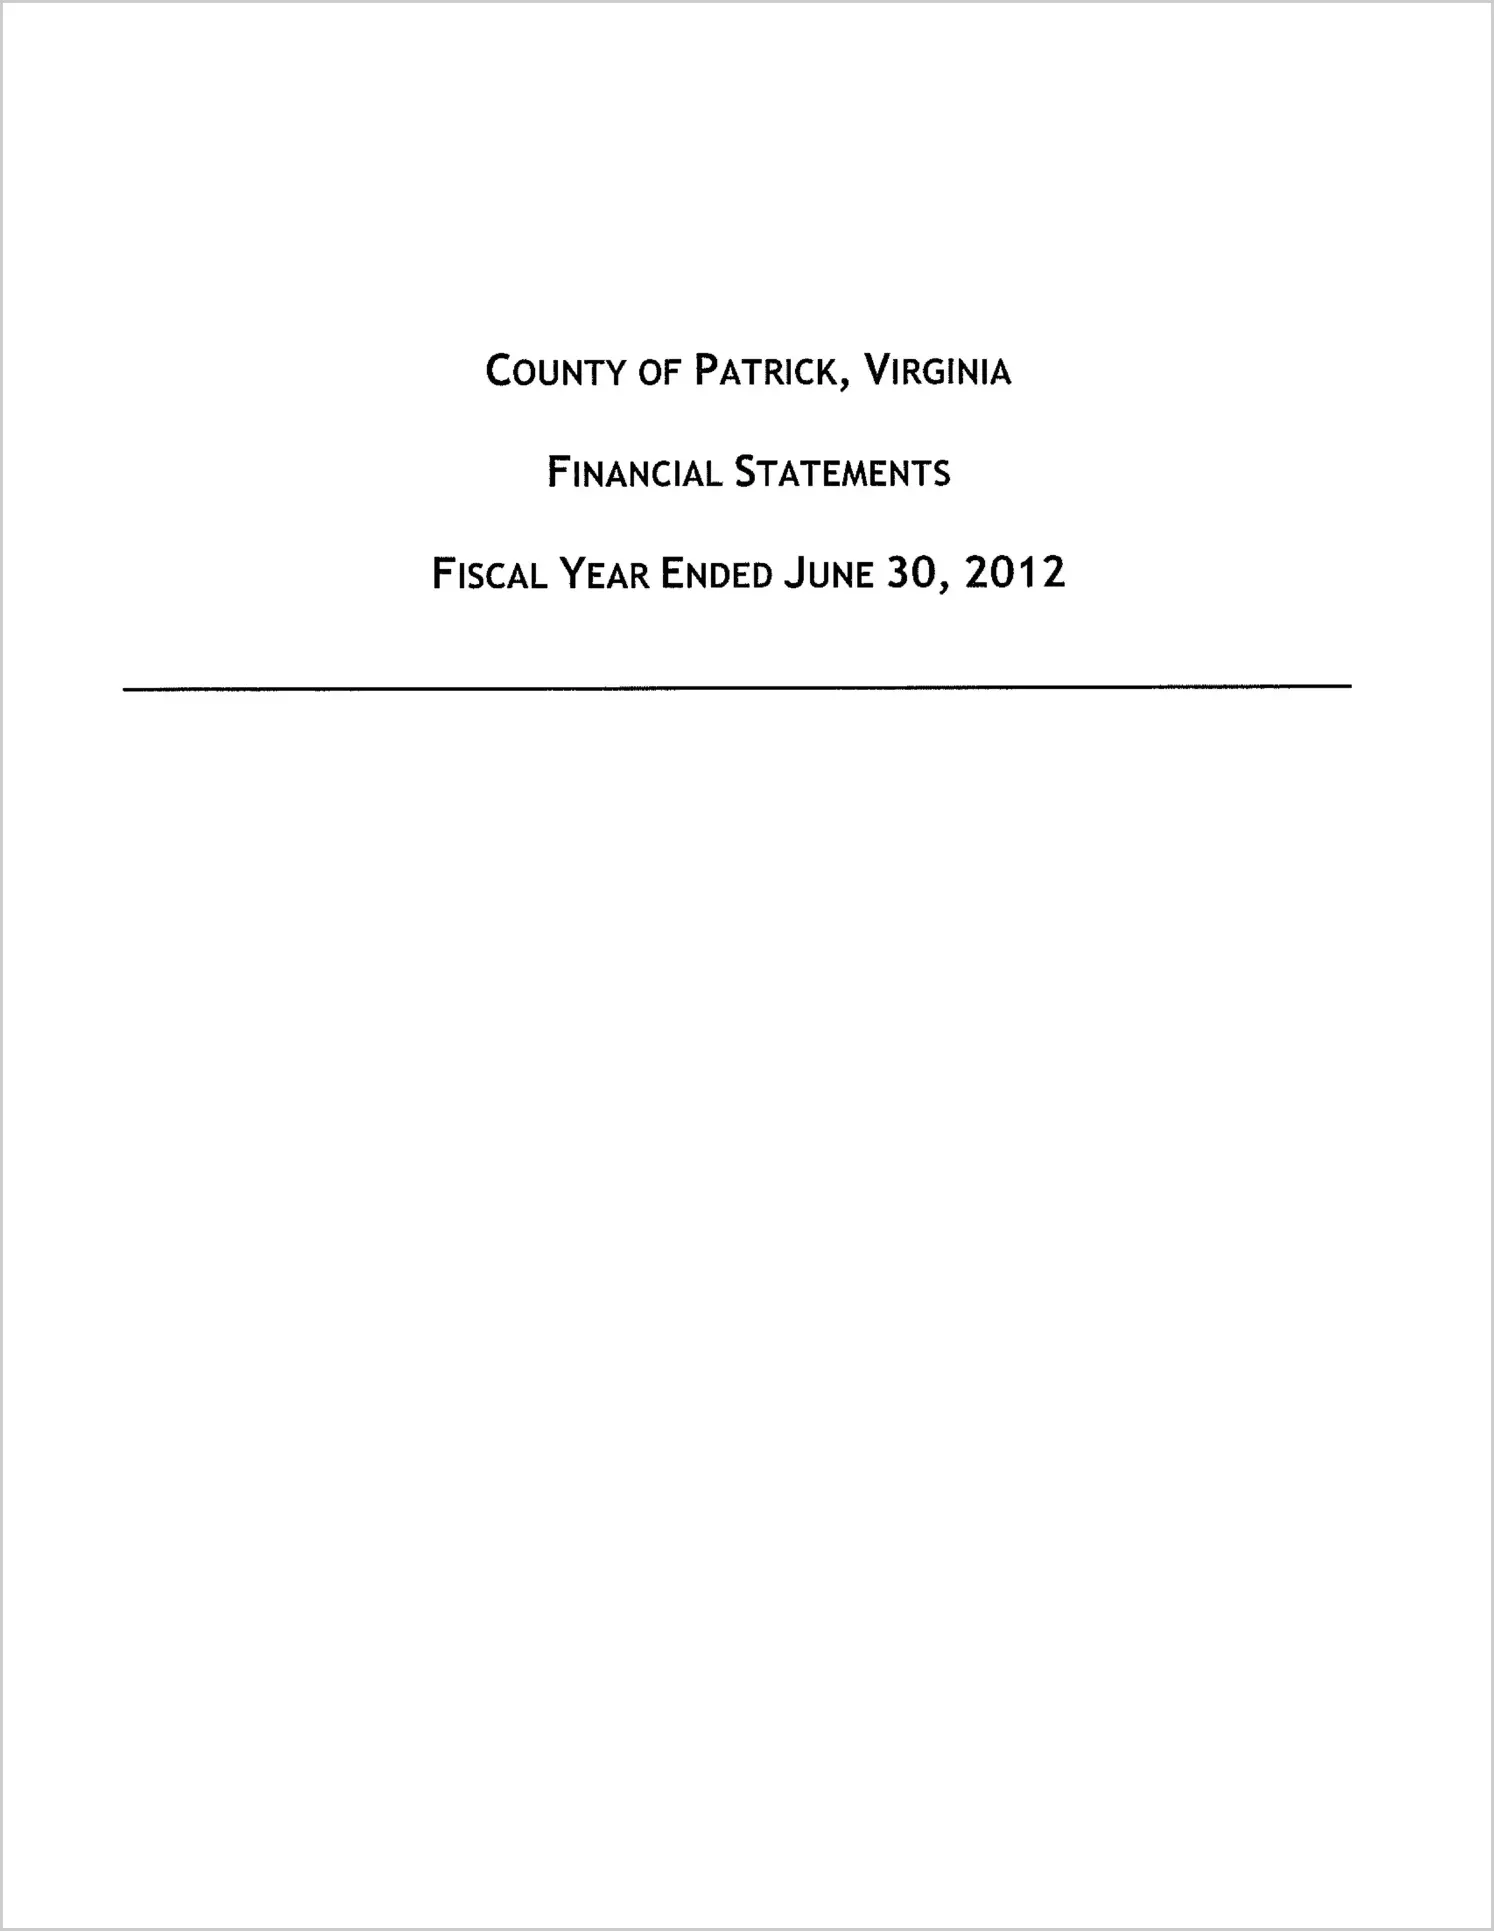 2012 Annual Financial Report for County of Patrick